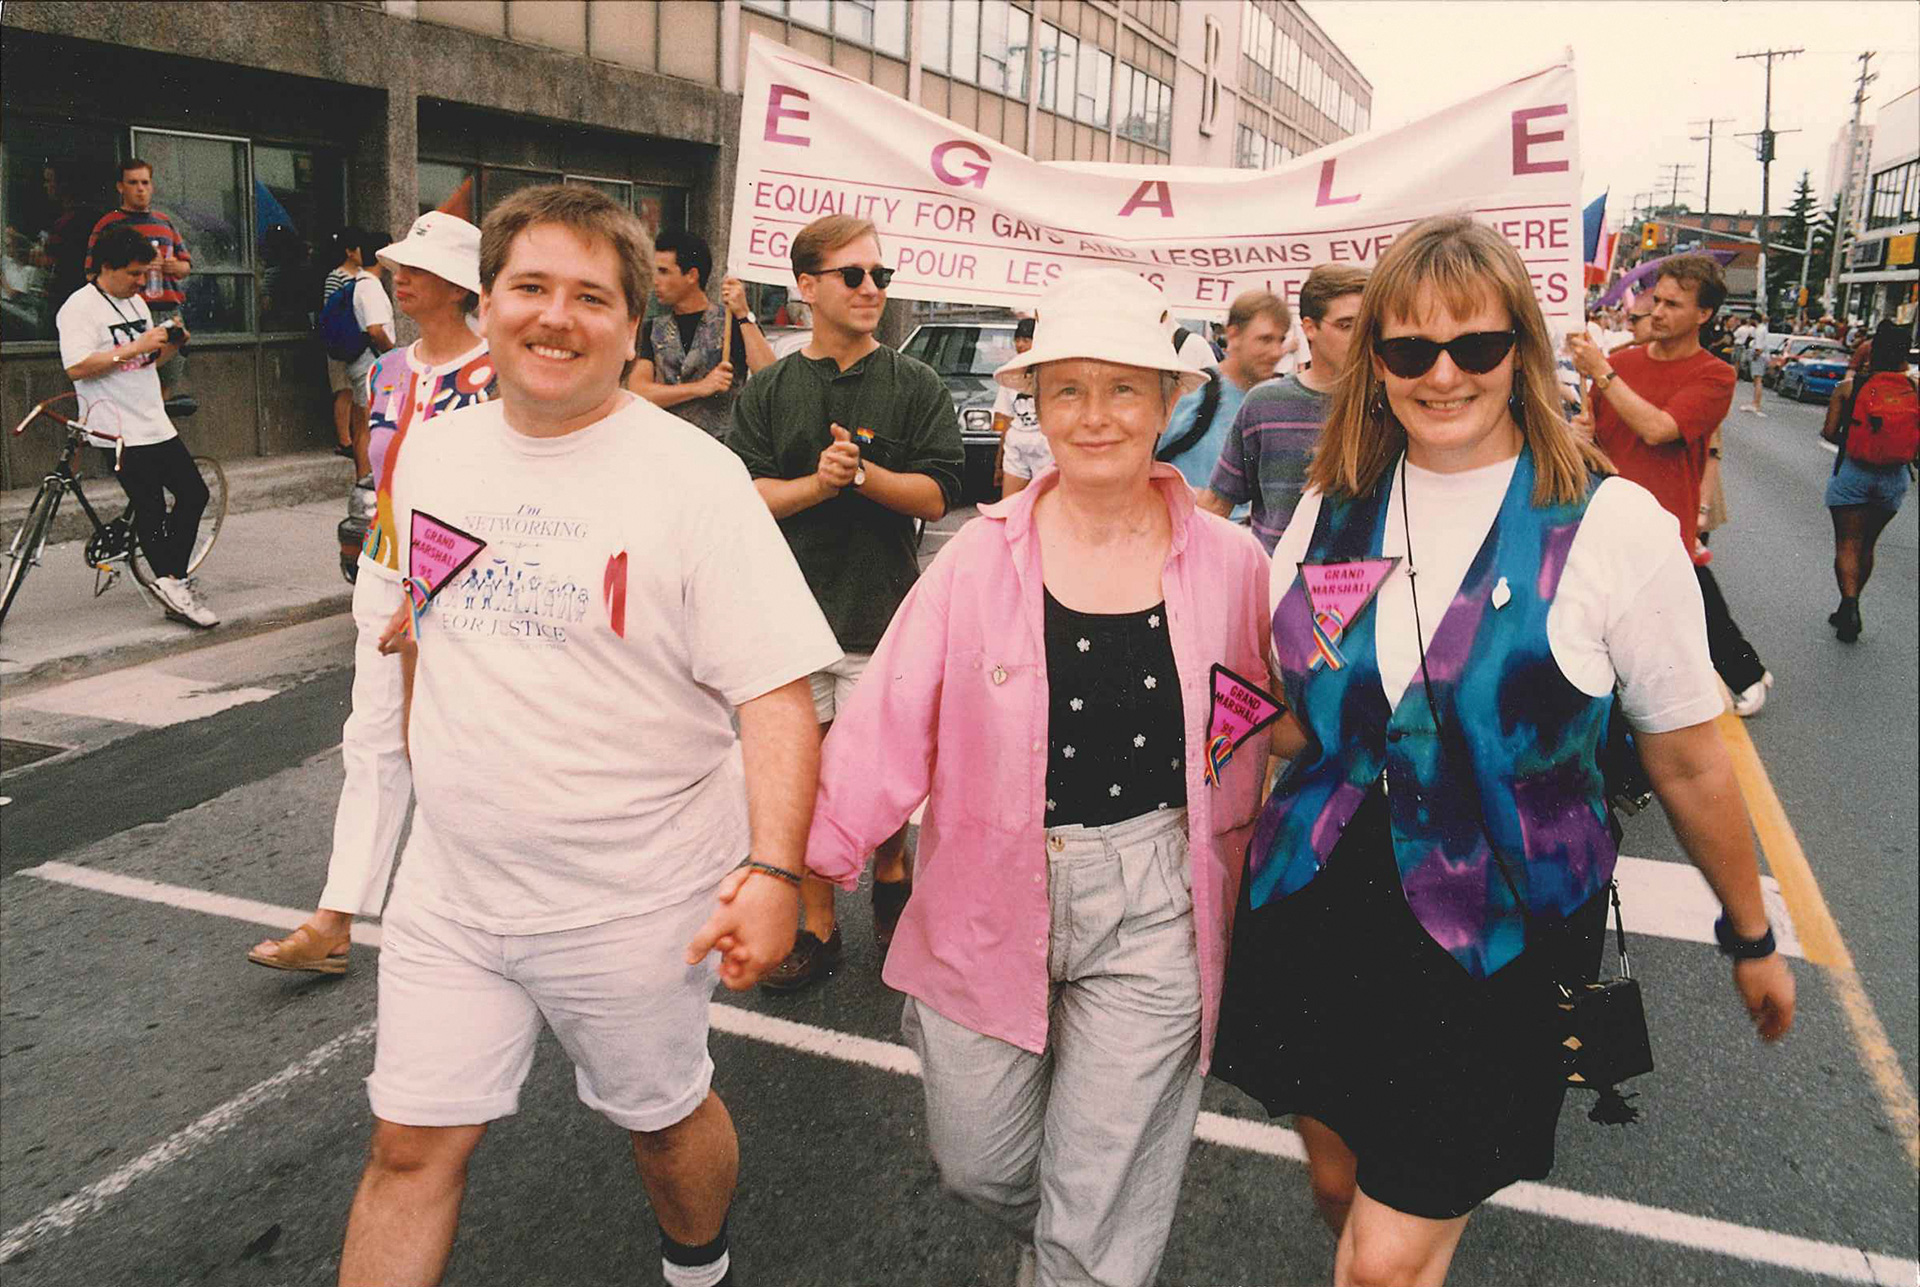 Three women walking together down the street during a Pride parade.